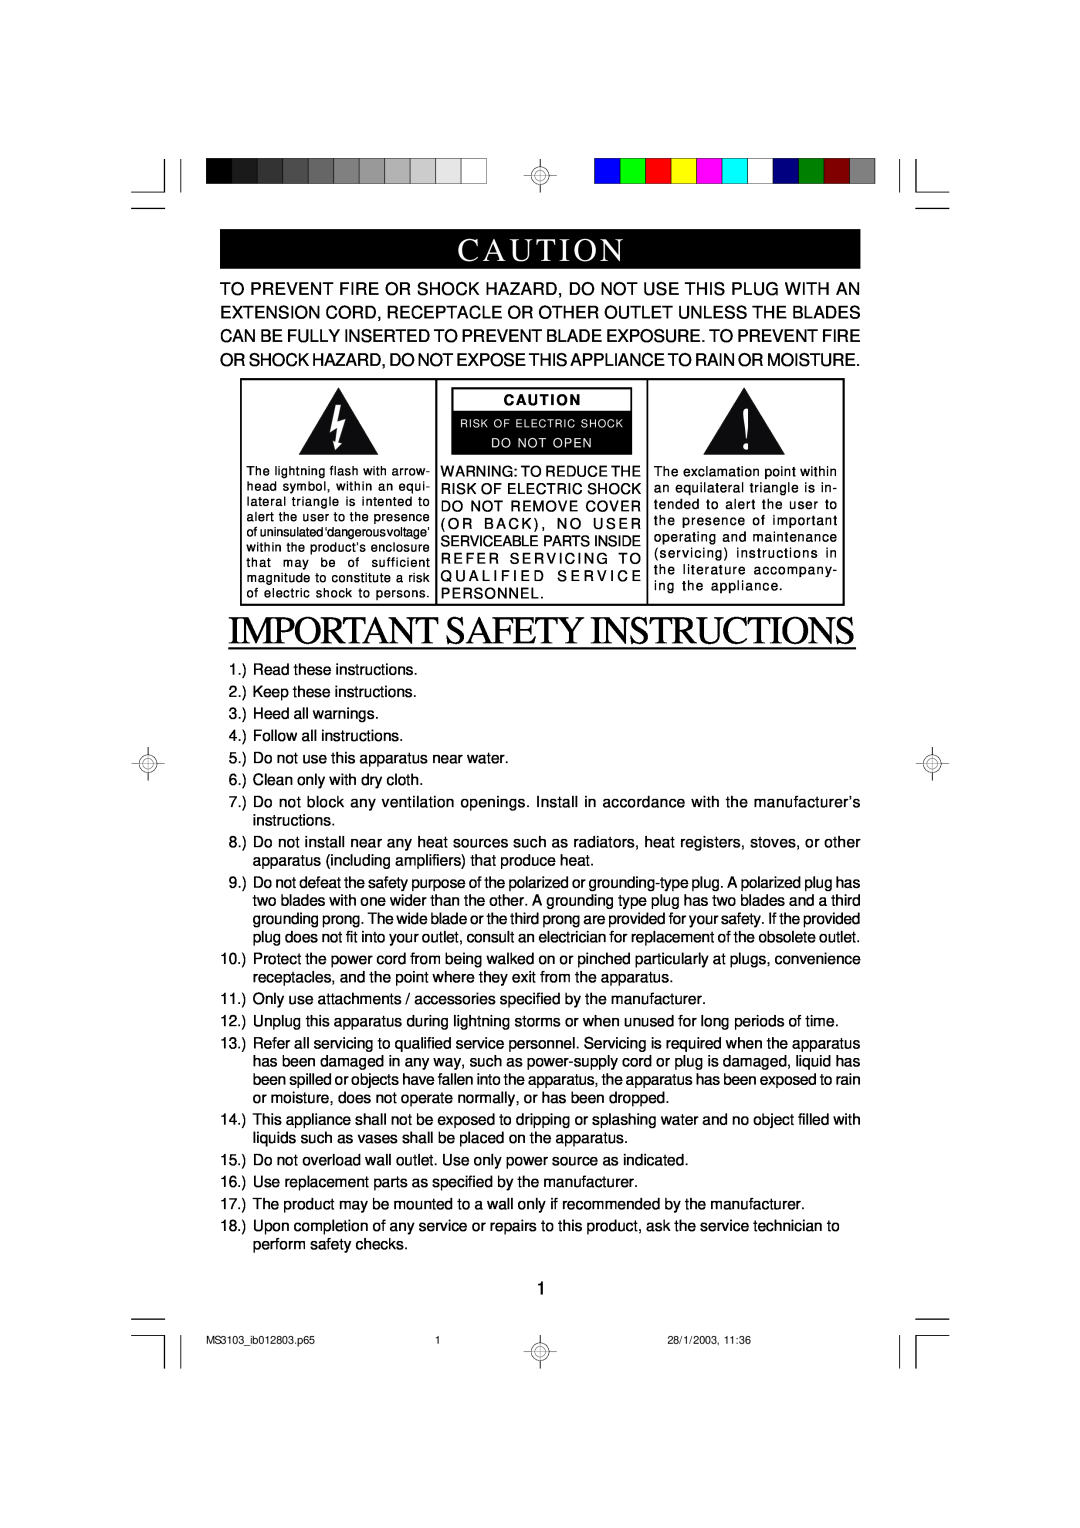 Emerson MS3103 owner manual Important Safety Instructions, Caut I On, Caut I O N 